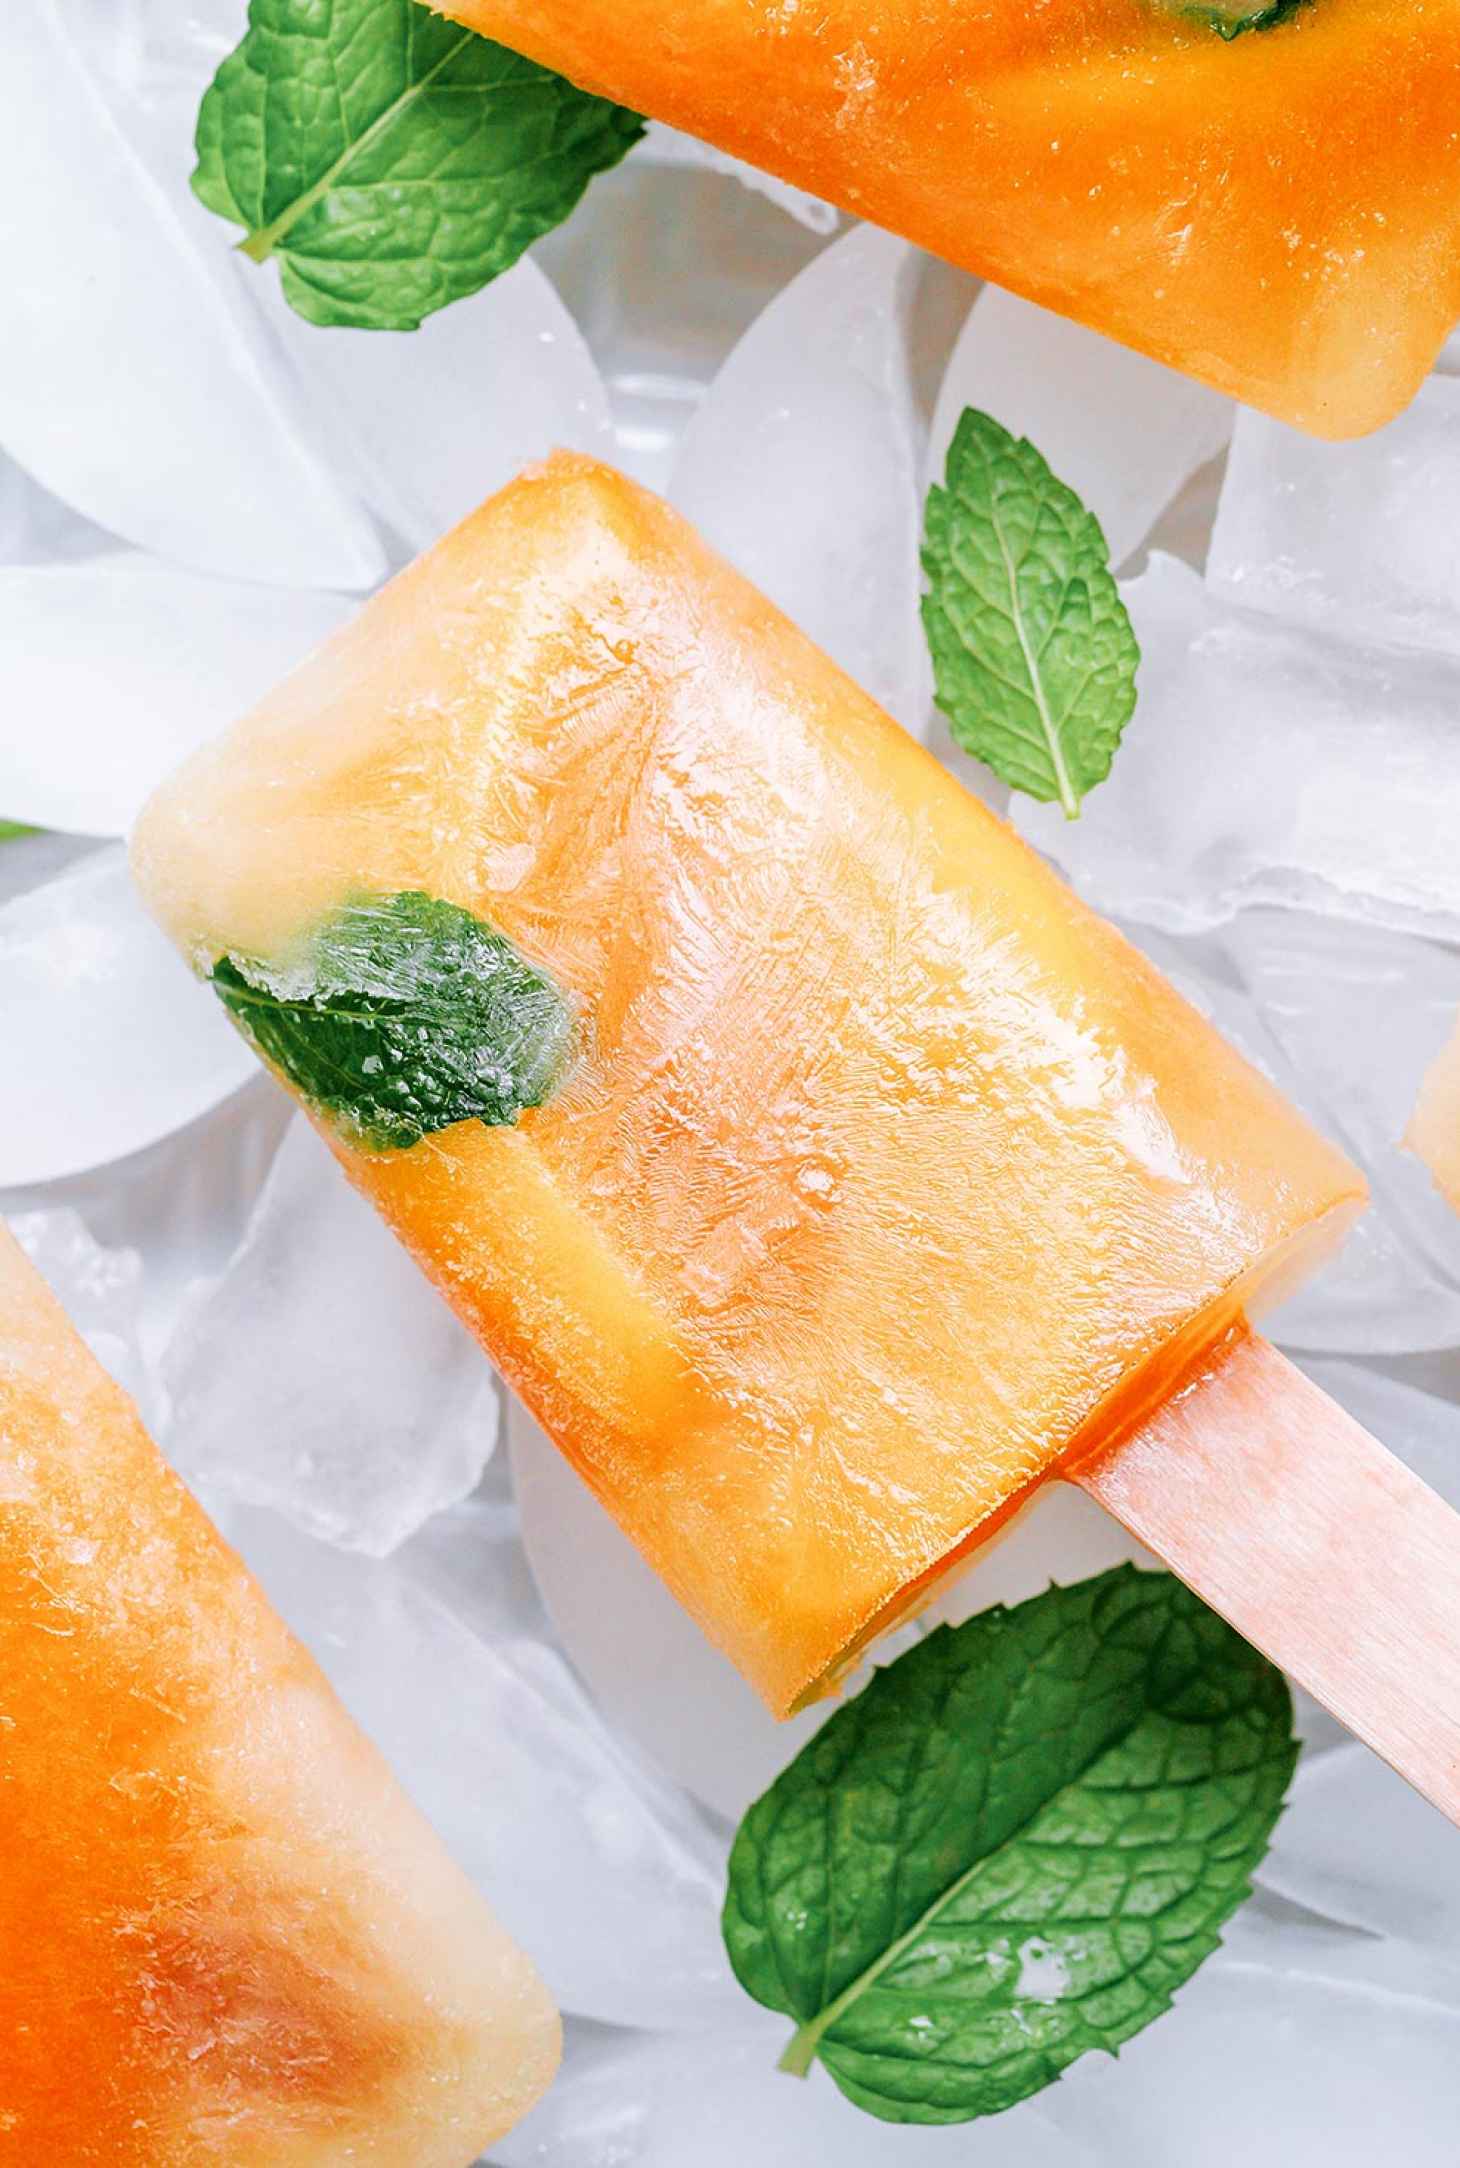 2-Ingredients Peach Popsicles - #recipe by #eatwell101 - https://www.eatwell101.com/peach-popsicles-recipe